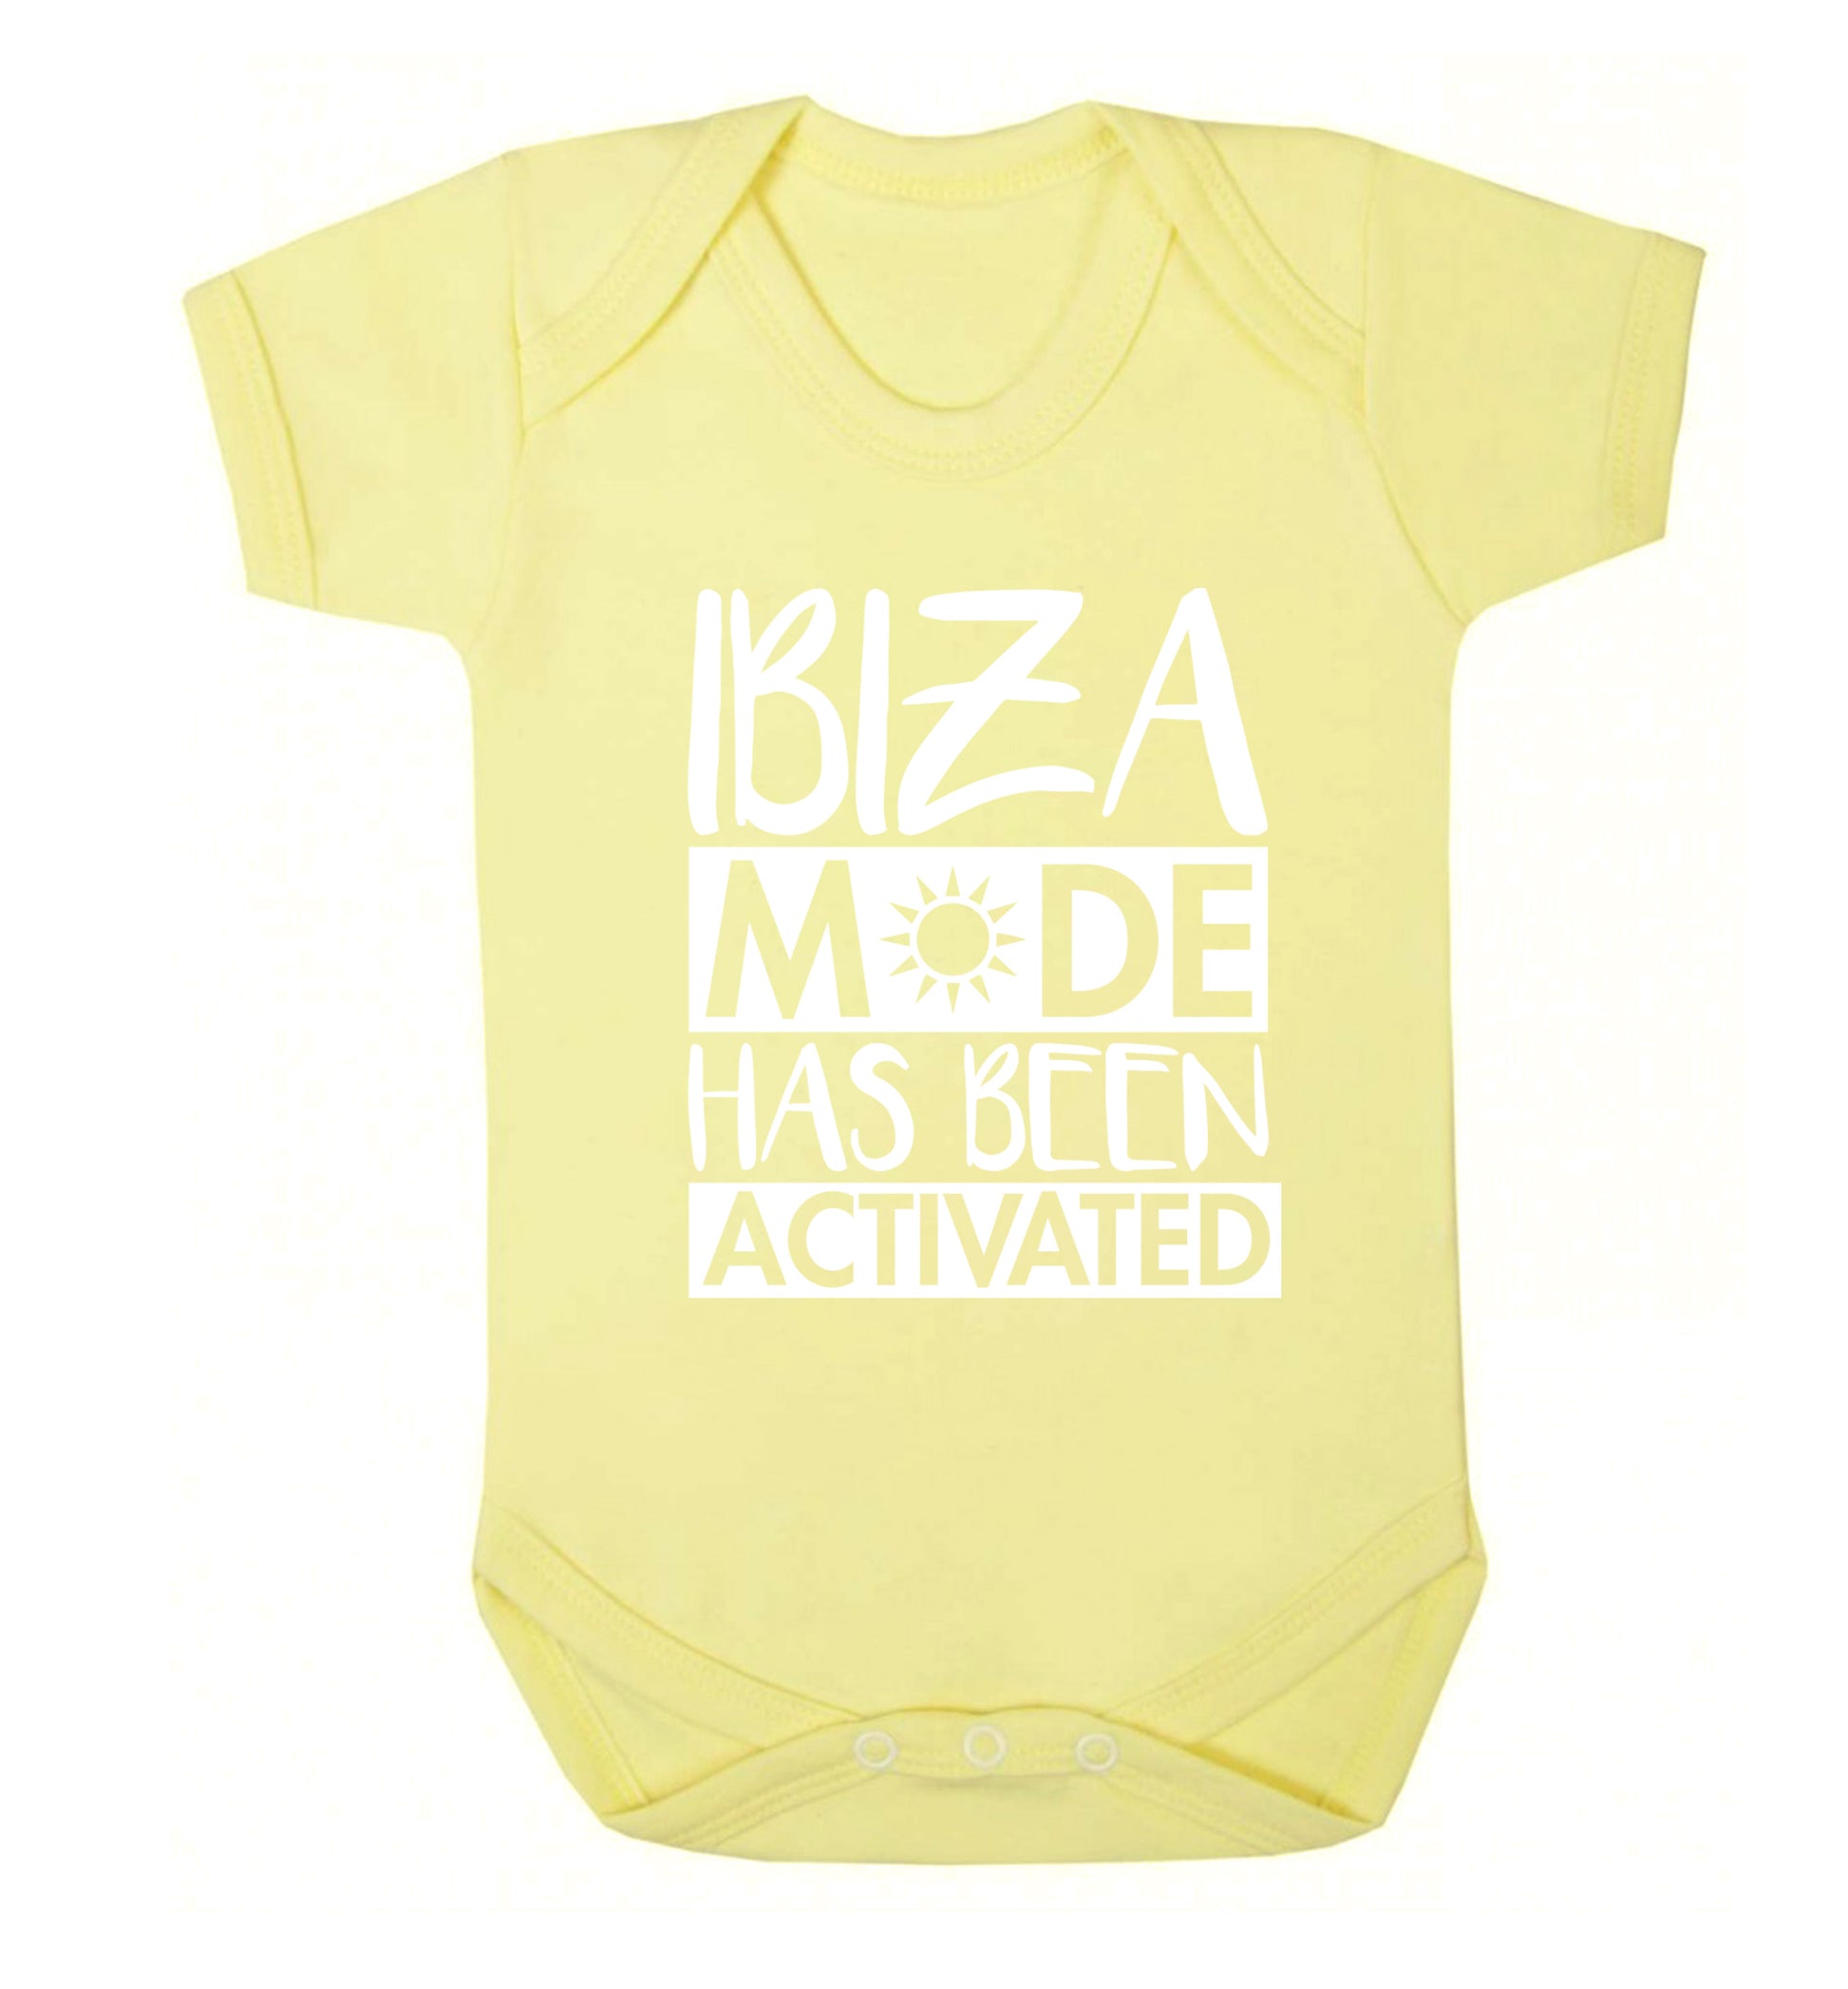 Ibiza mode has been activated Baby Vest pale yellow 18-24 months